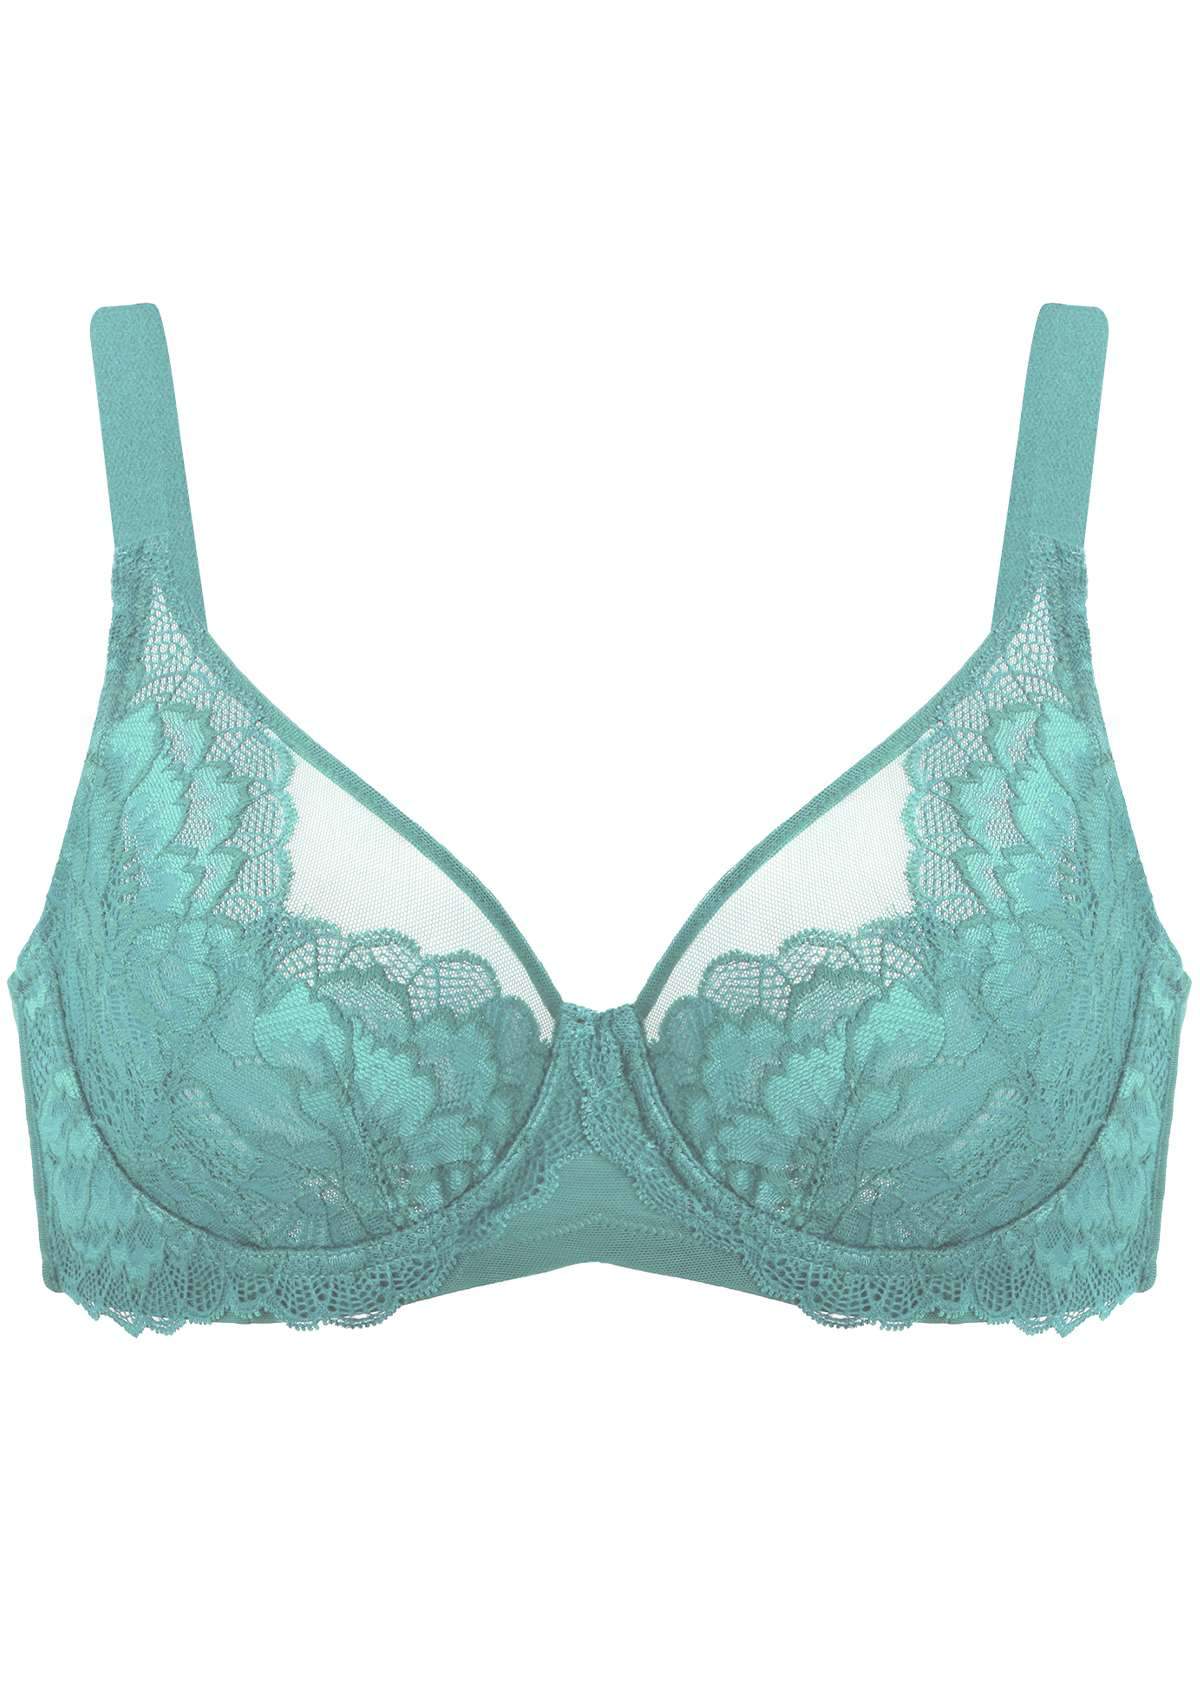 HSIA Peony Lace Unlined Supportive Underwire Bra - Dark Blue / 42 / C